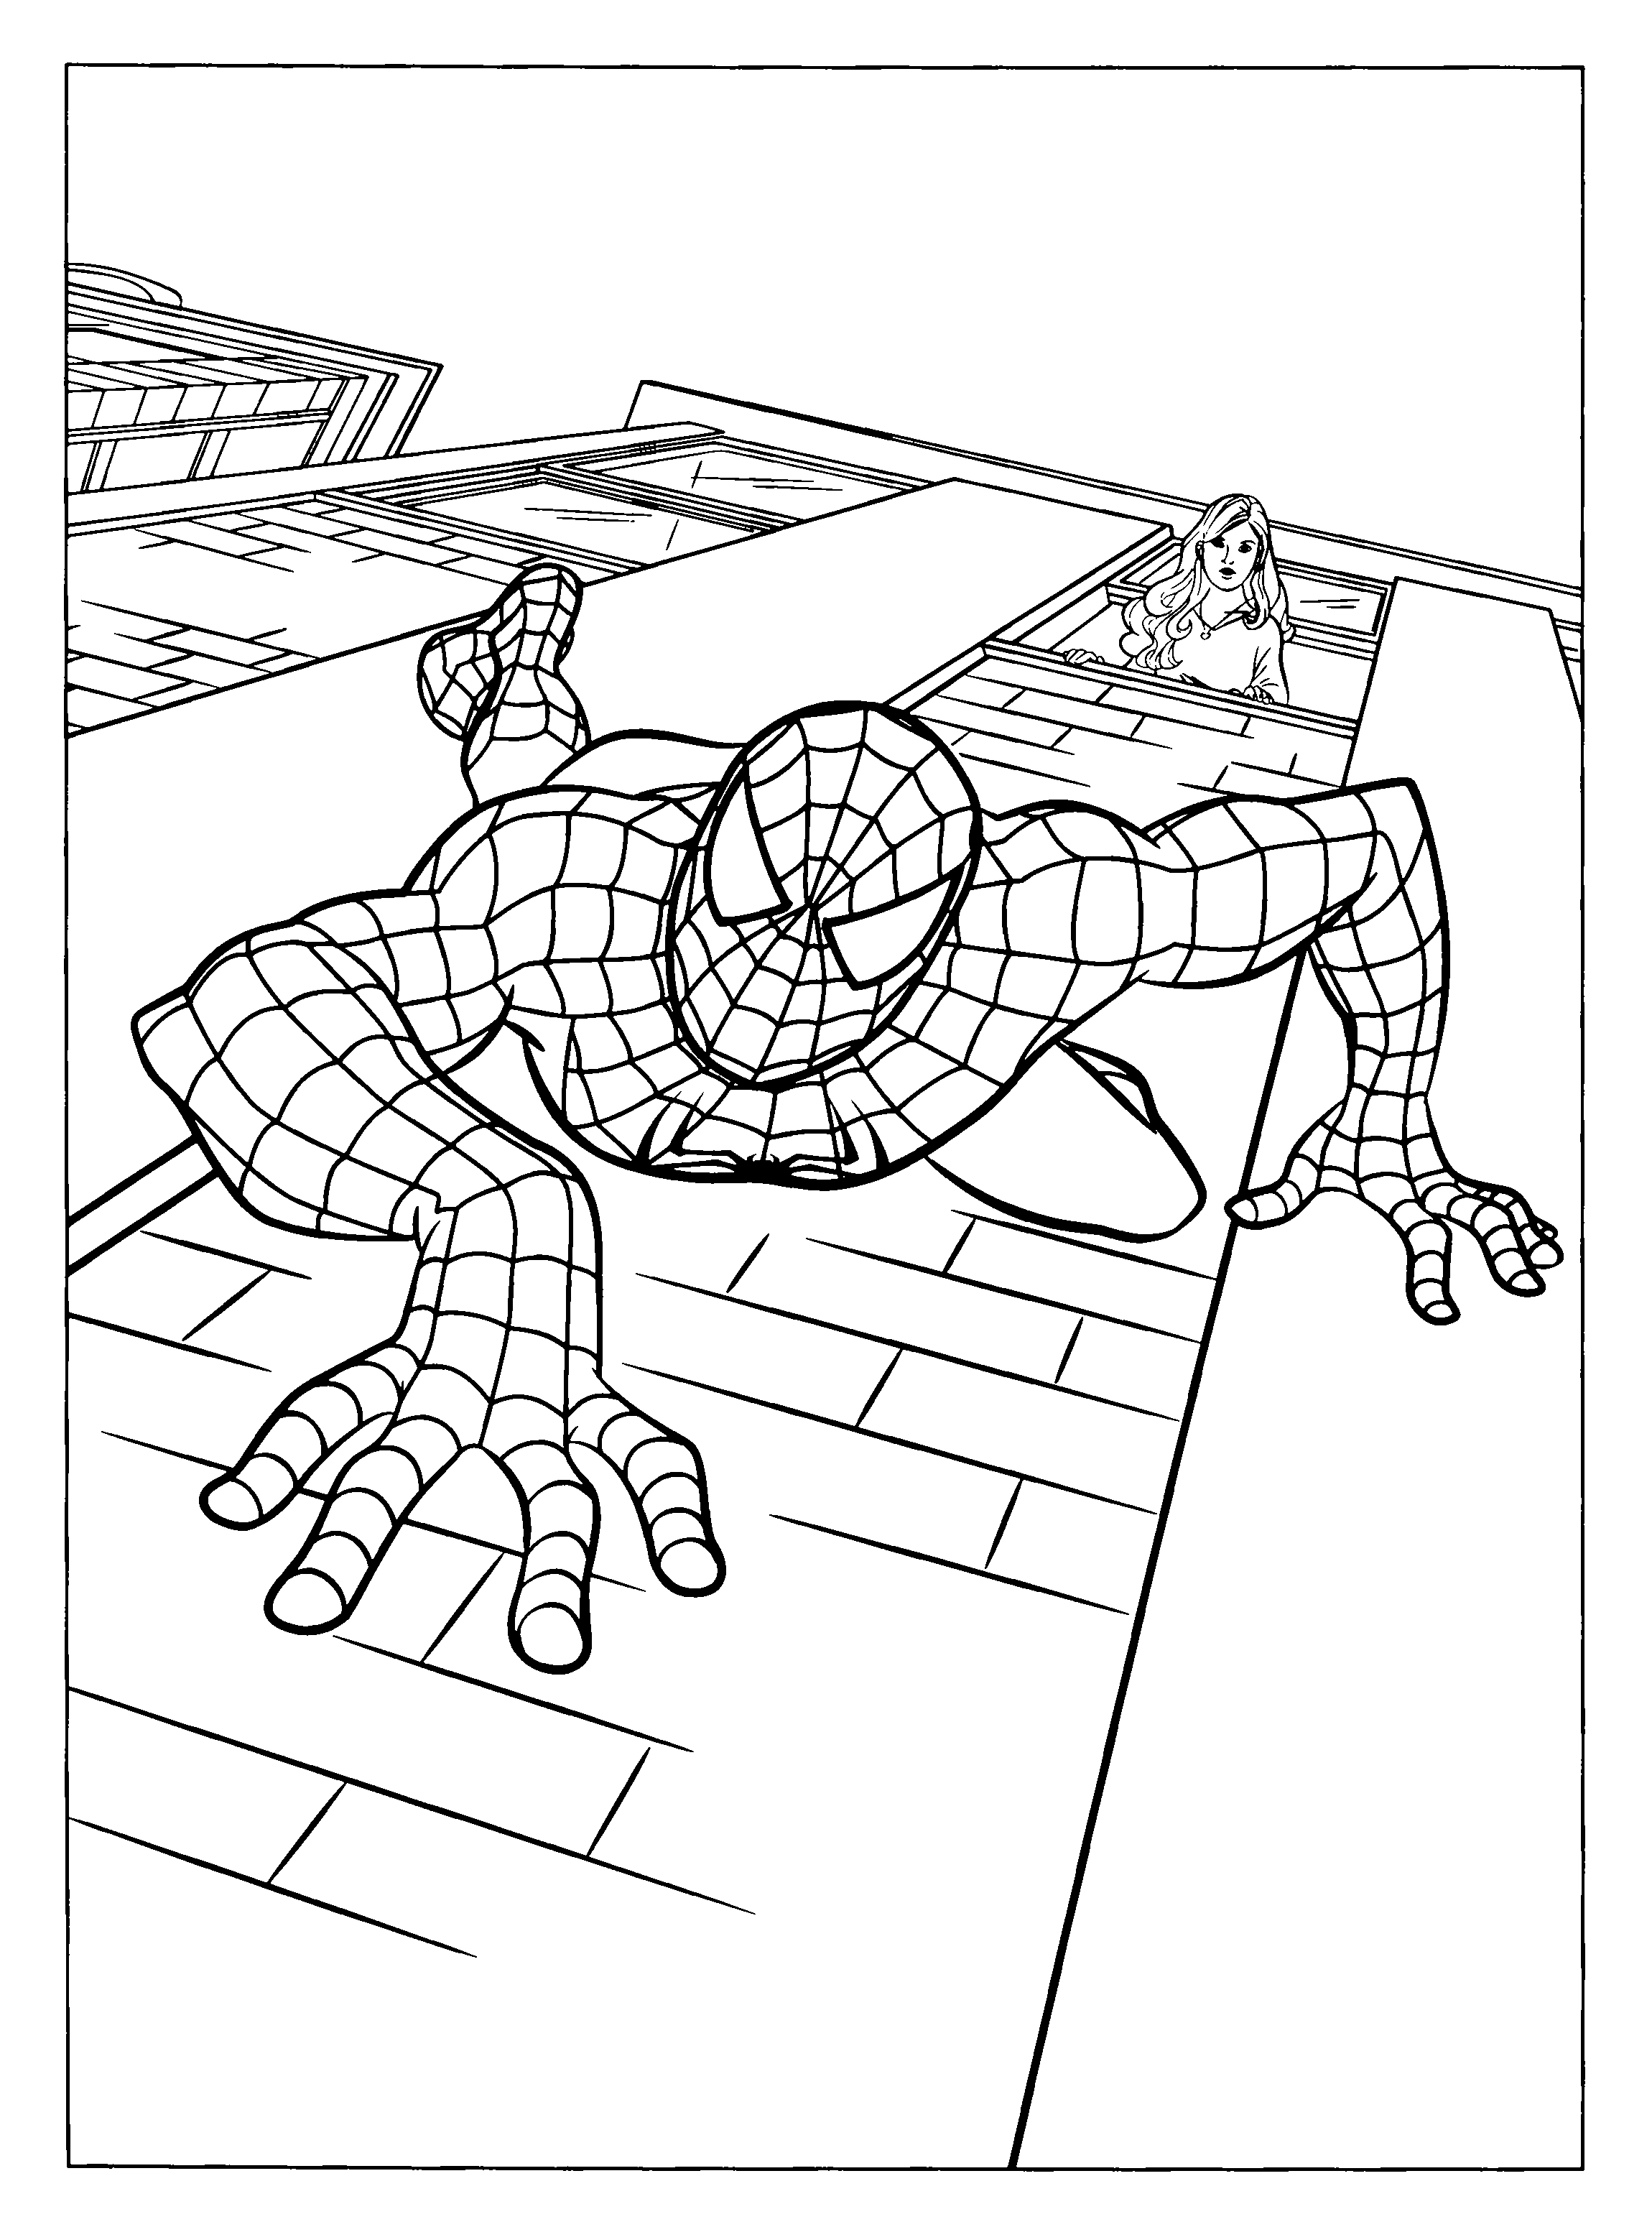 spiderman 2 coloring page